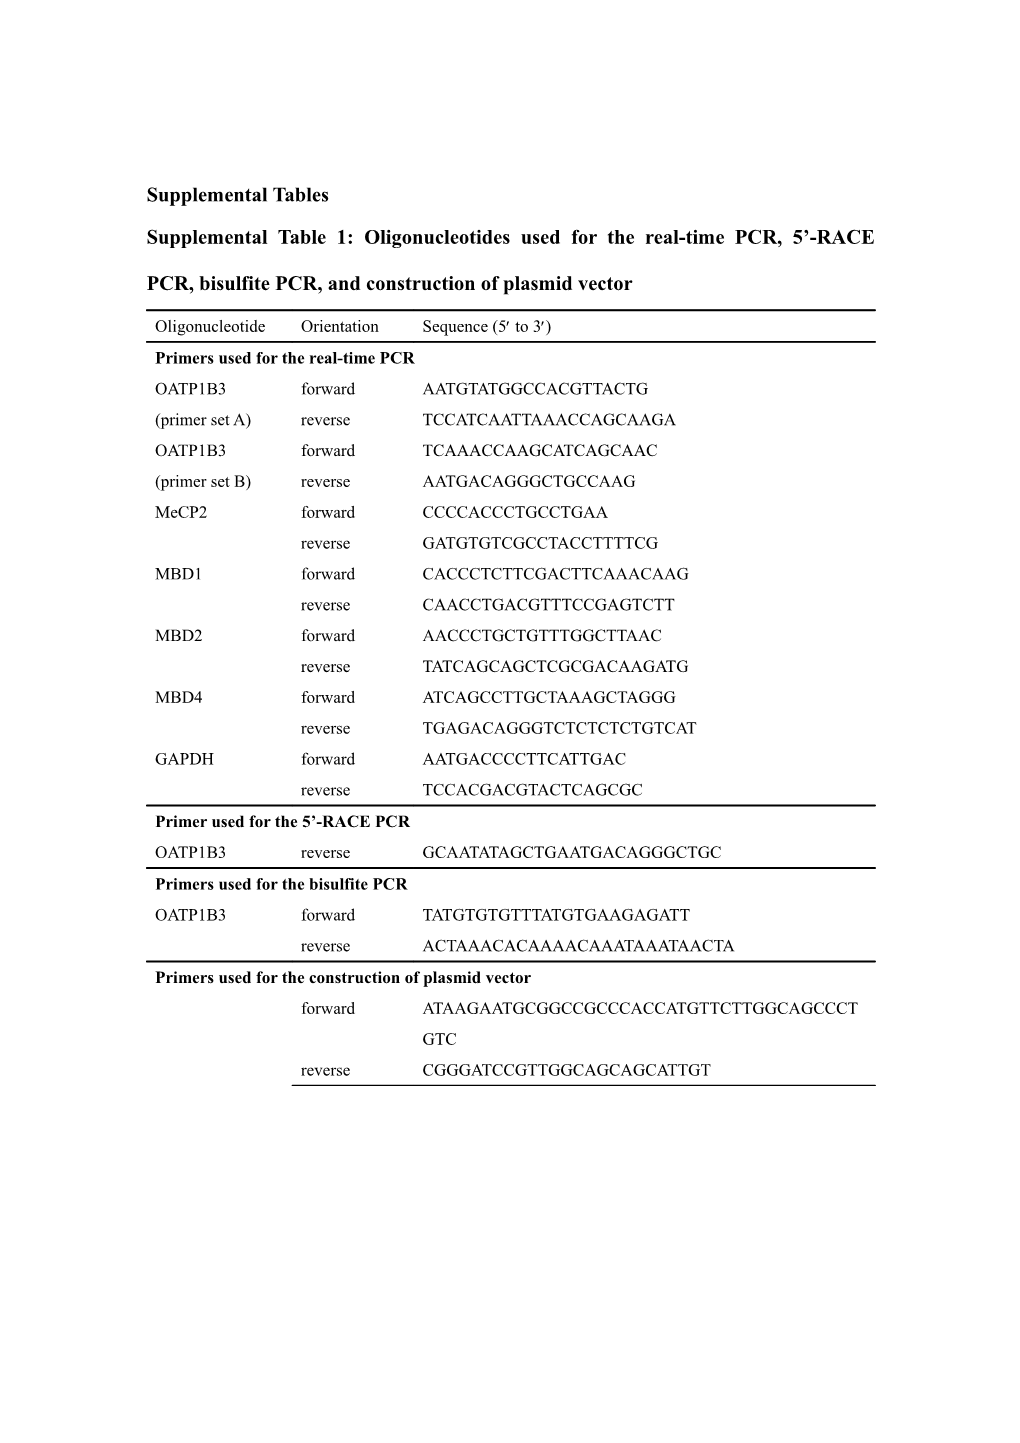 Supplemental Table 2: Analytical Conditions for Fluvastatin and Rifampicin